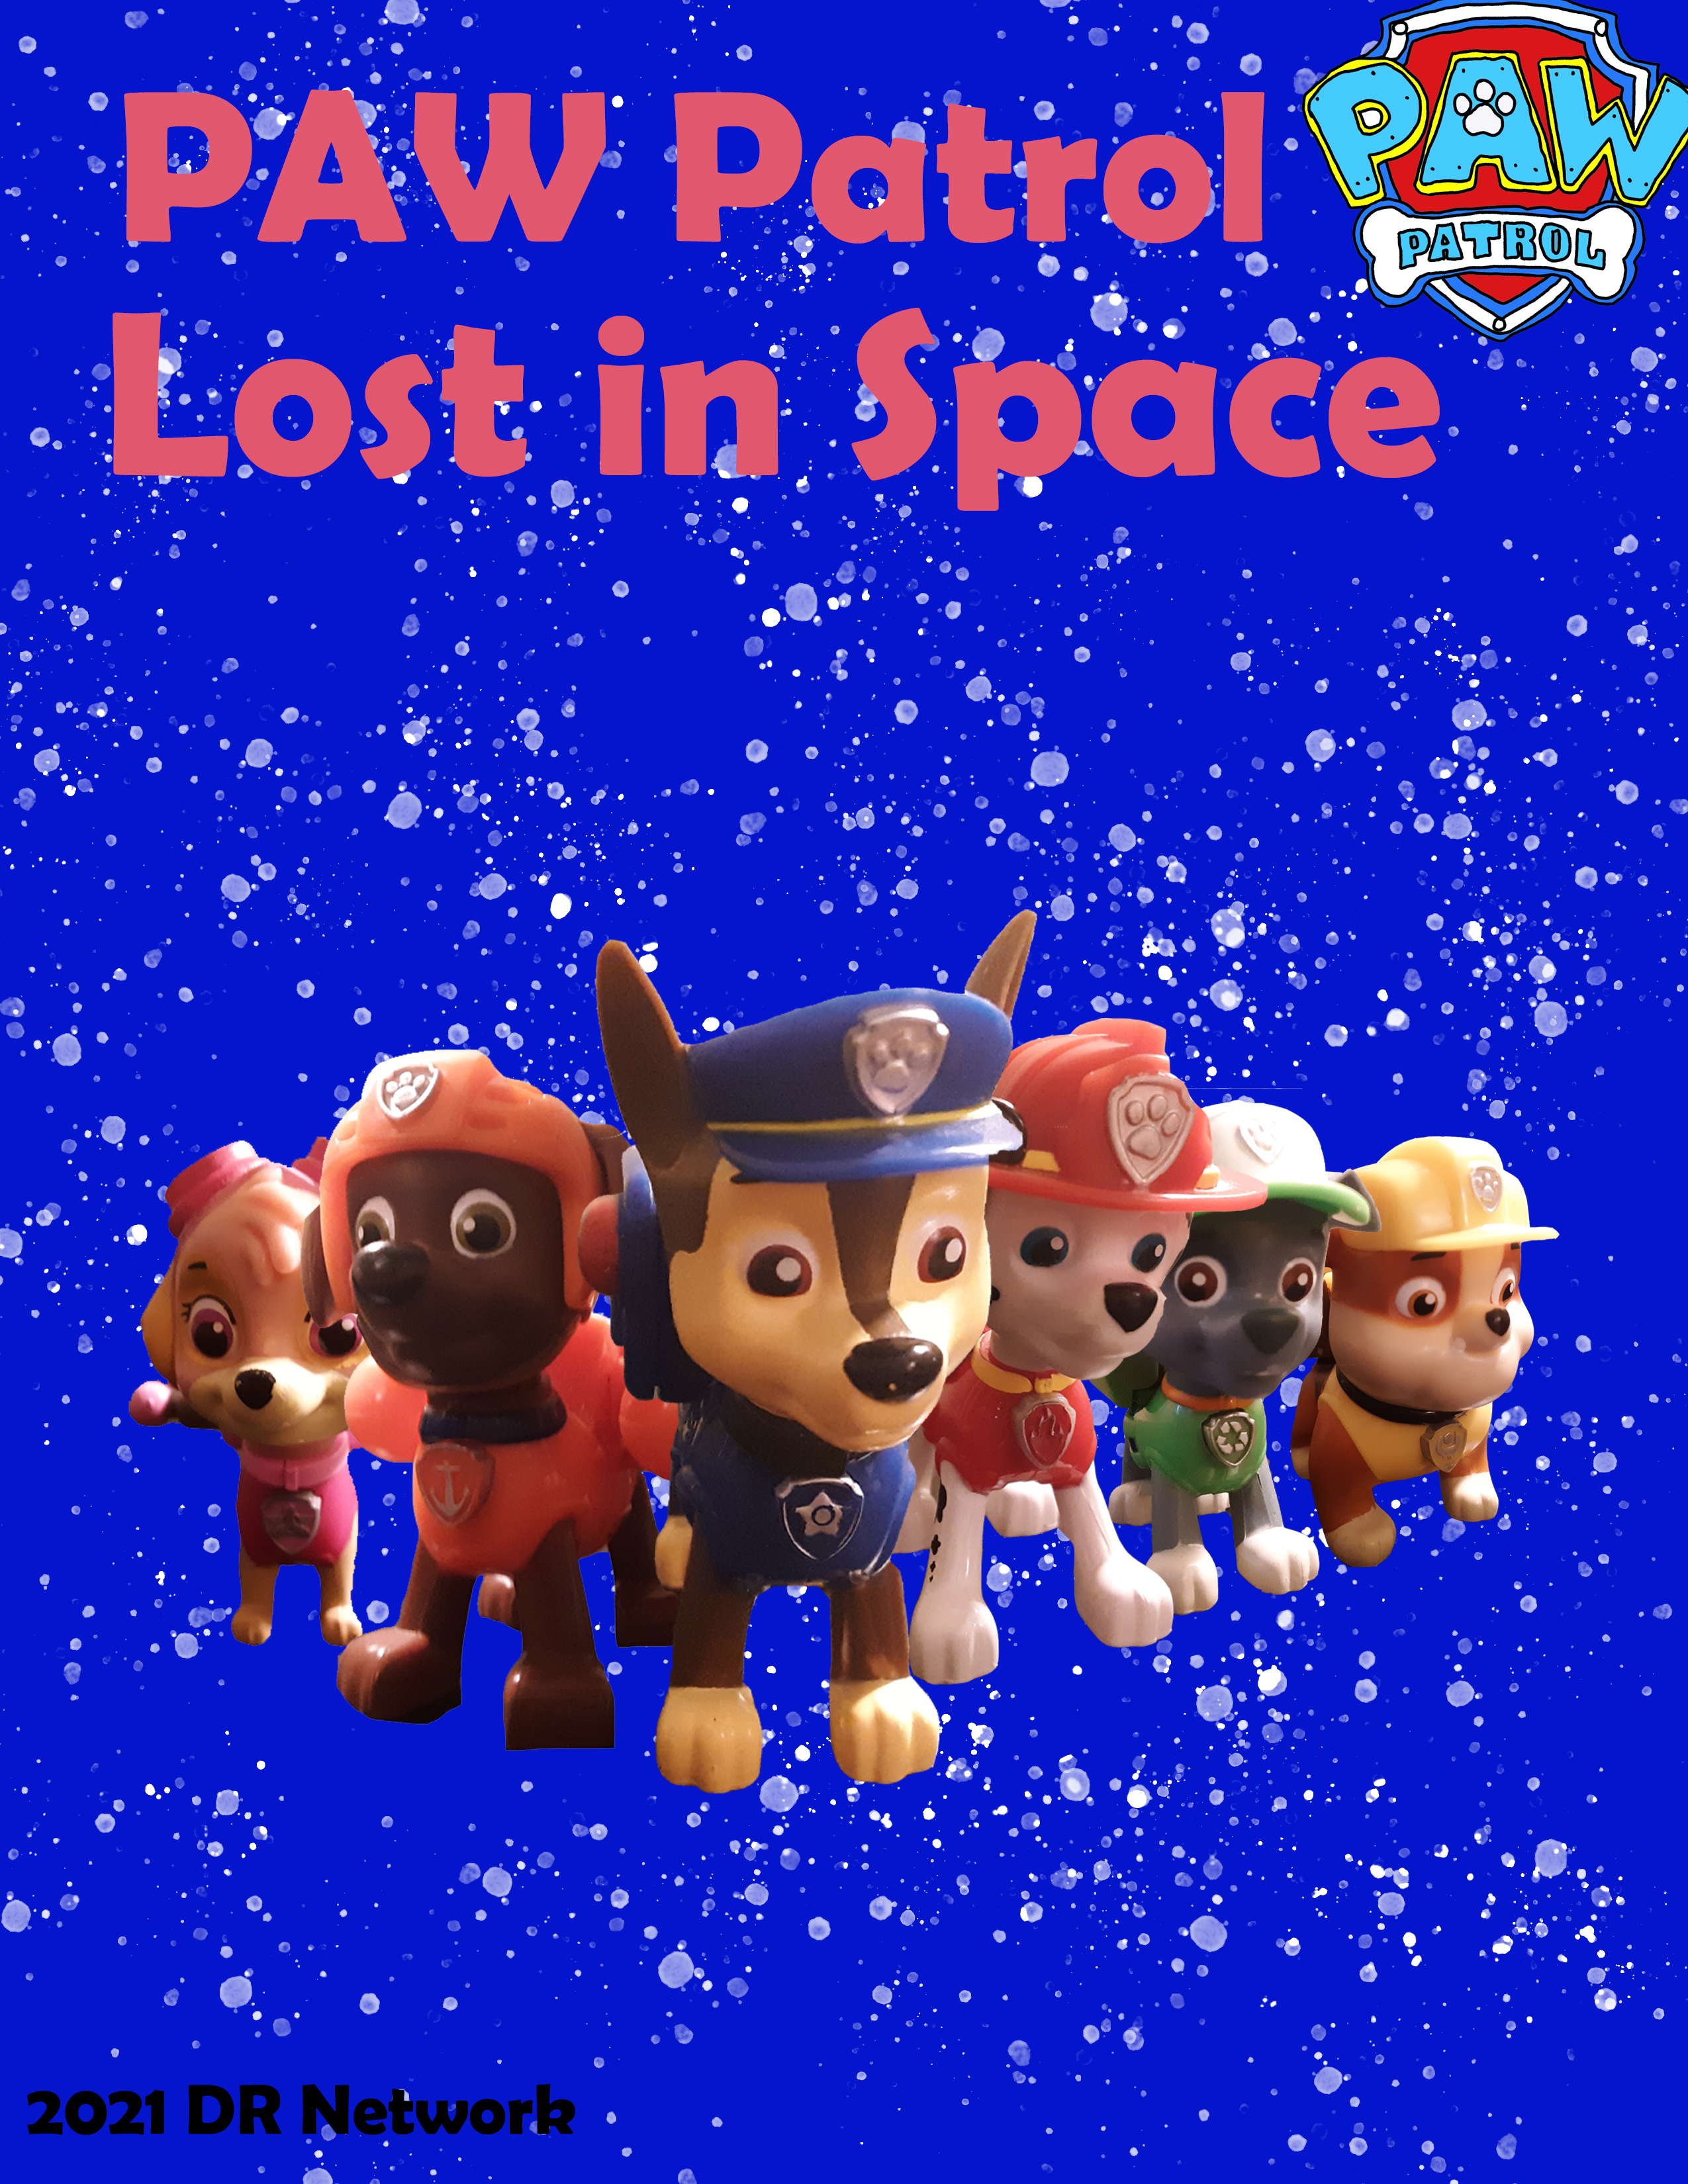 PAW Patrol: lost in space | The DR Network Wiki | Fandom